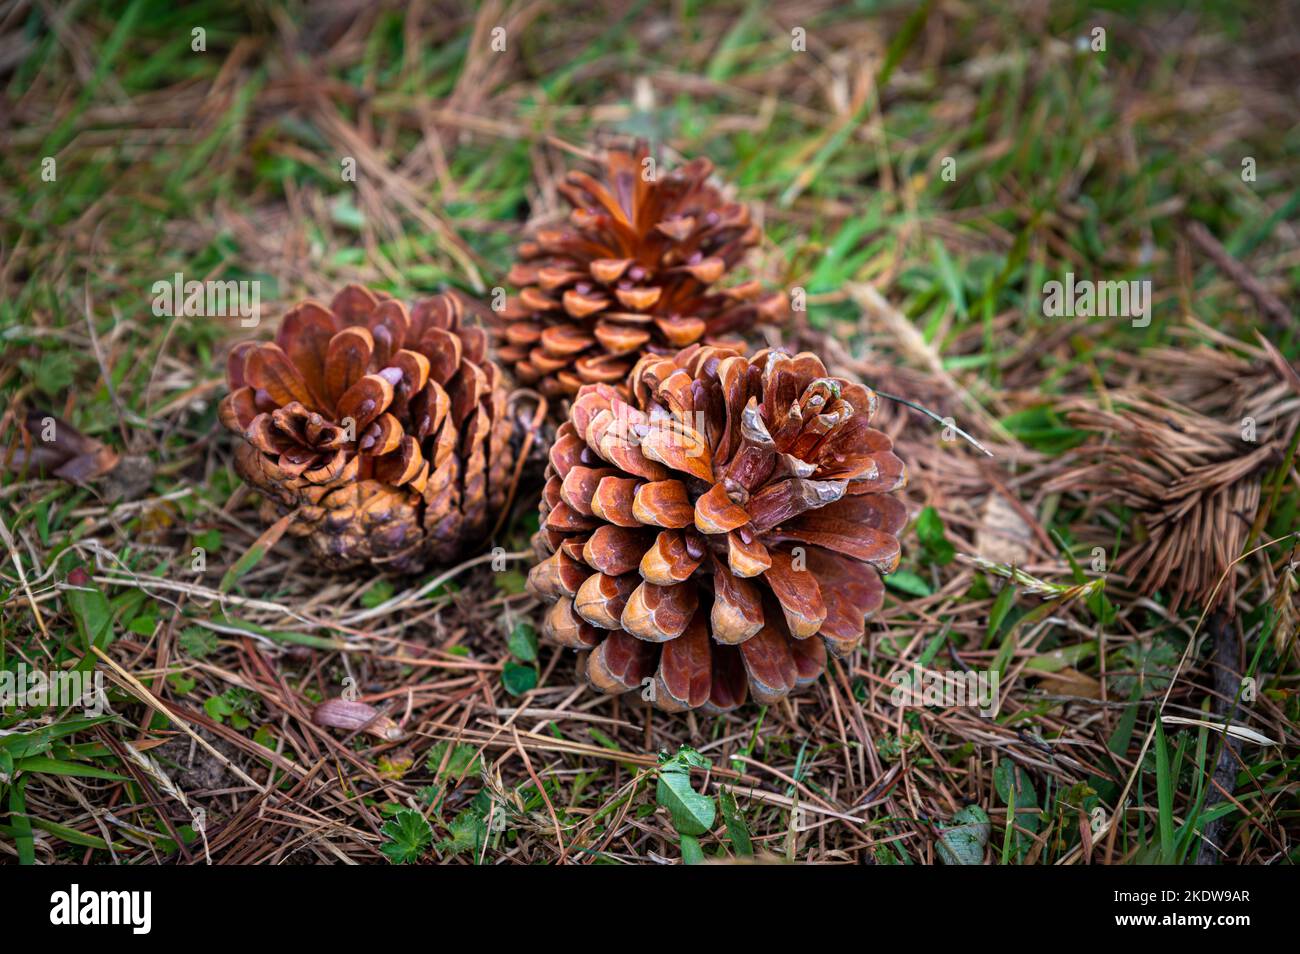 Close up view of pine cones lying on the grass. A conifer cone is a seed-bearing organ on gymnosperm plants. Stock Photo